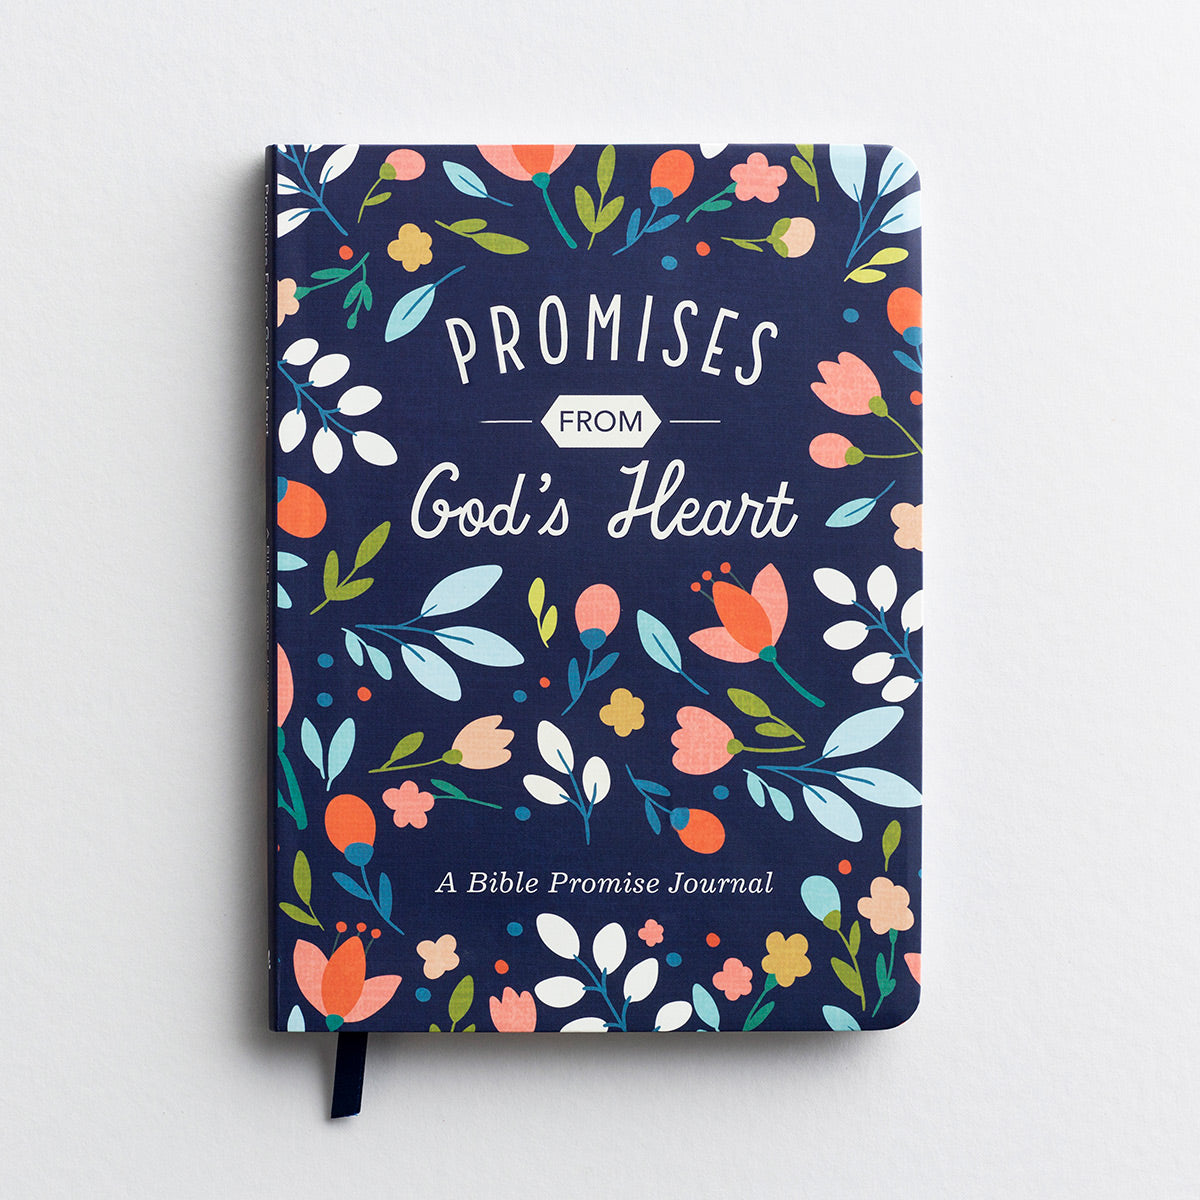 Image of Promises From God's Heart - A Bible Promise Journal other